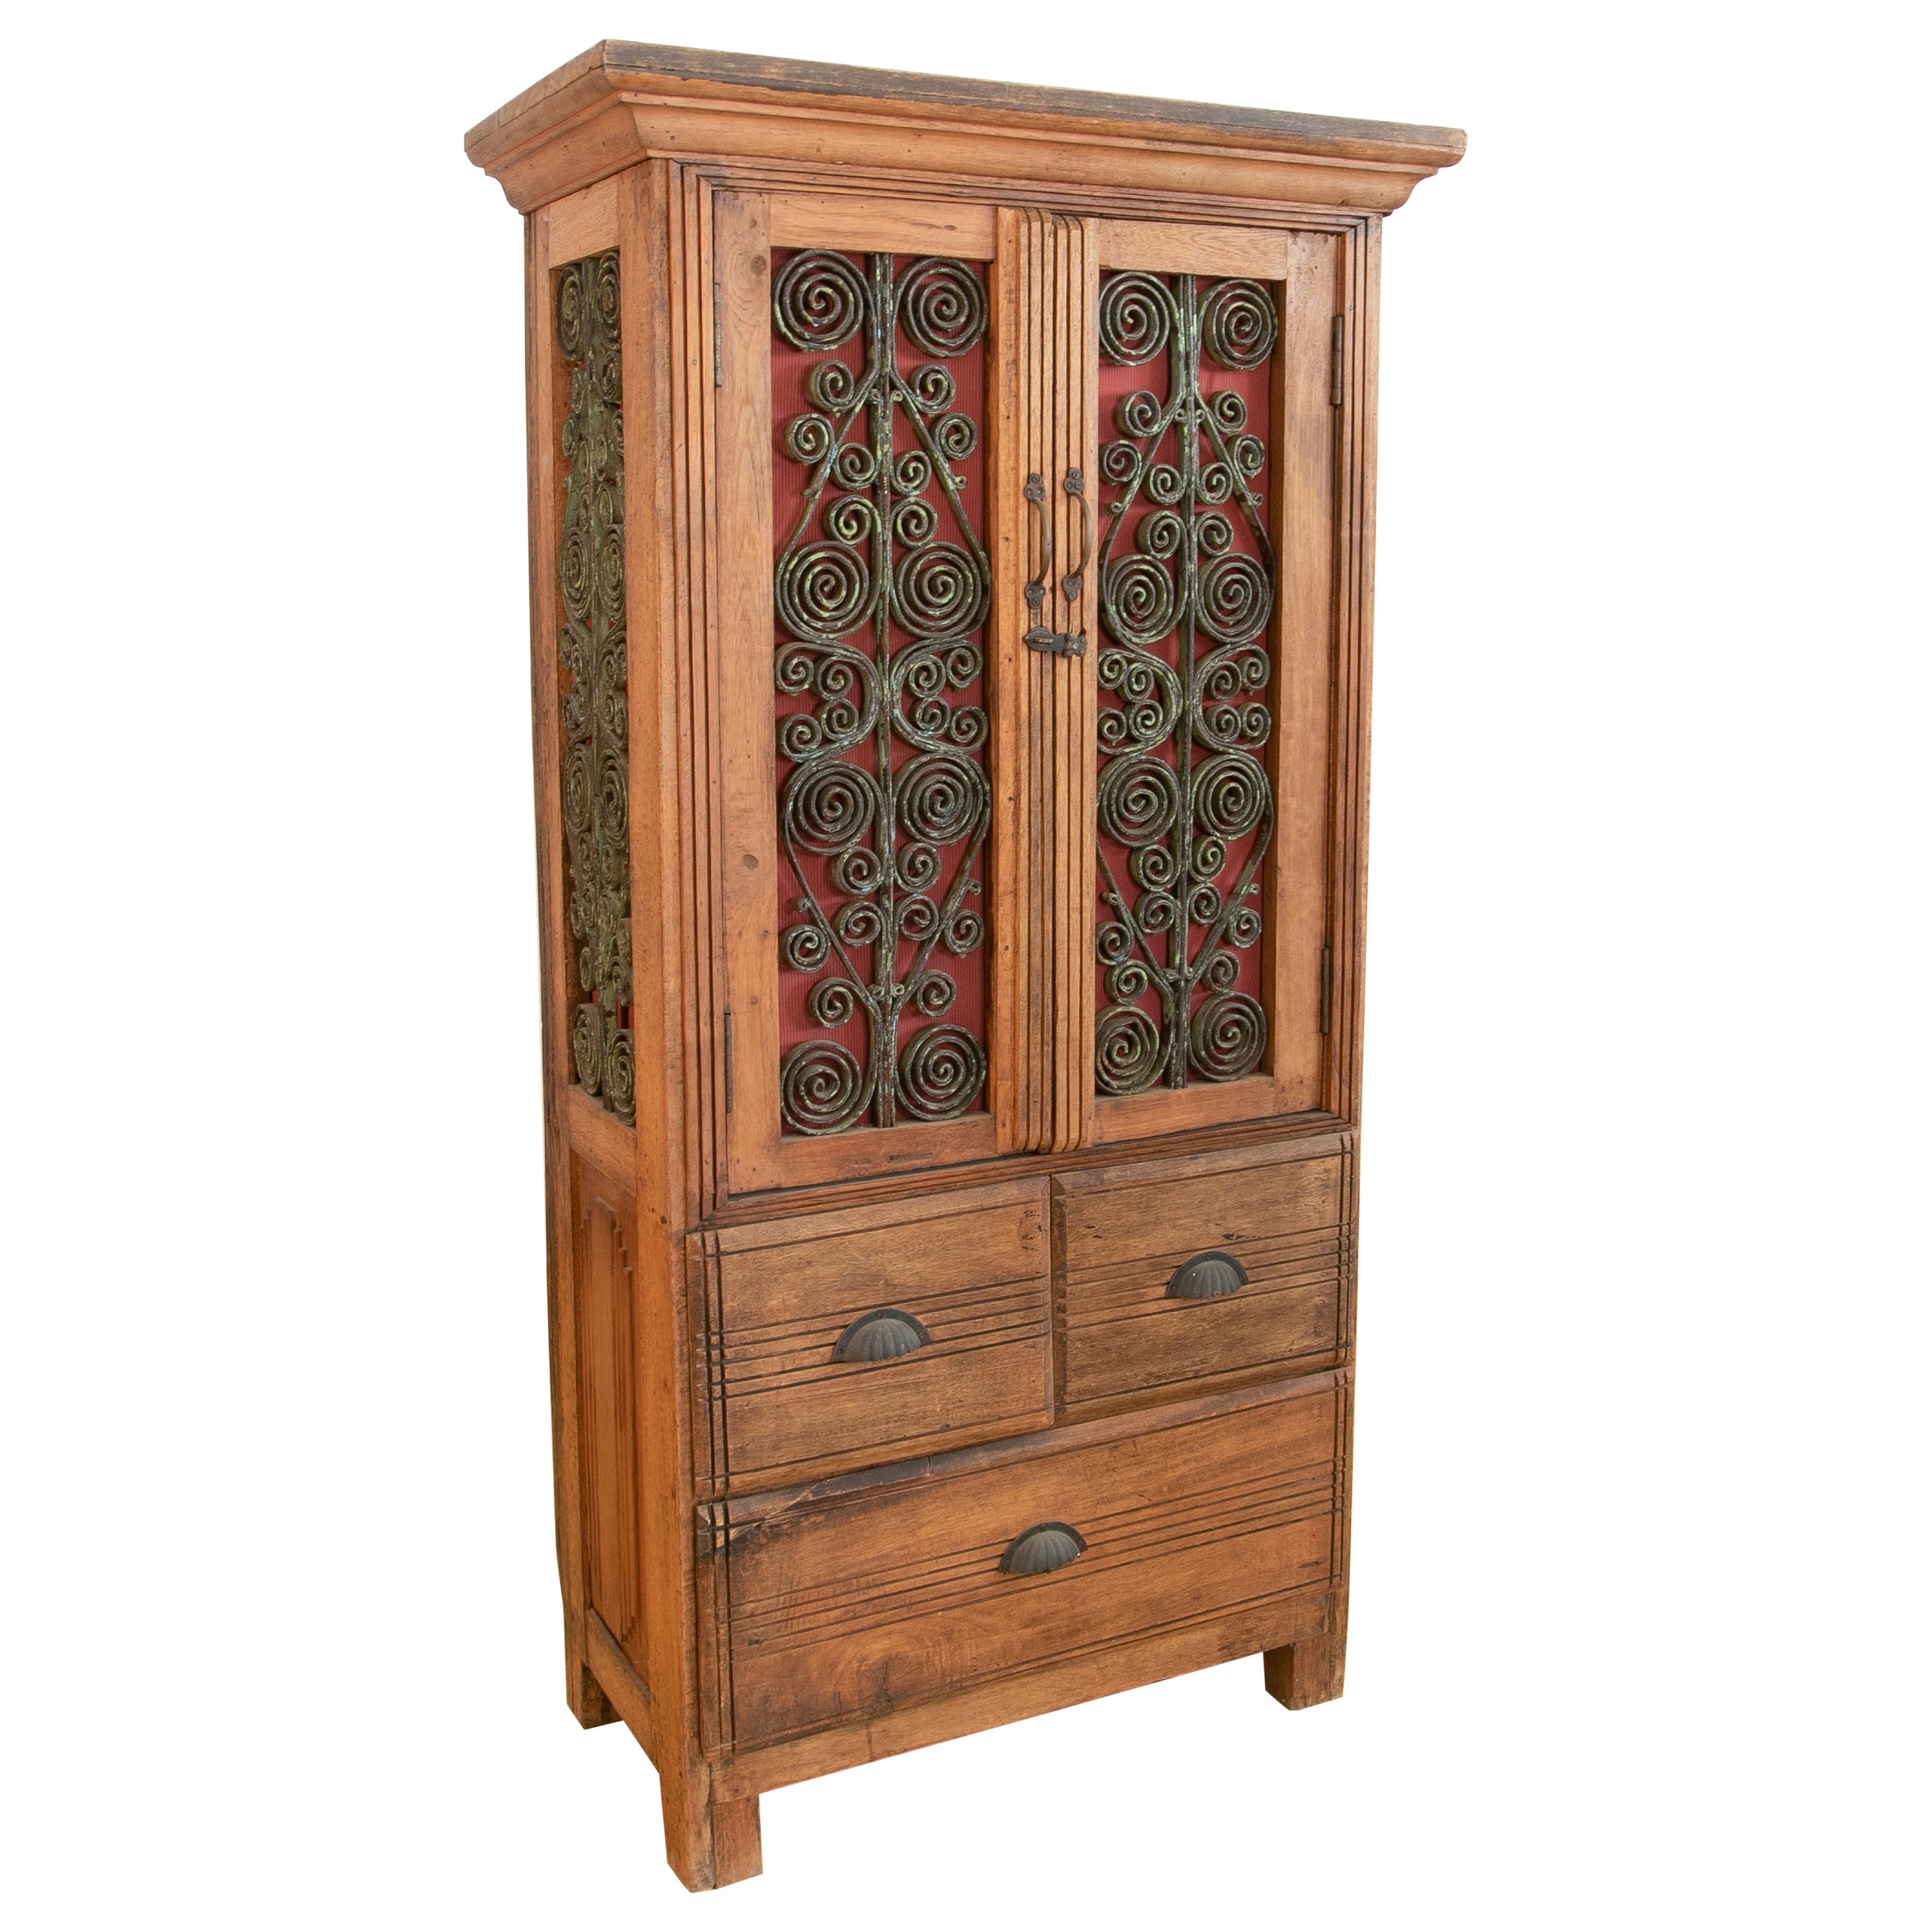 Wooden Wardrobe with Iron Decorated Doors and Three Drawers